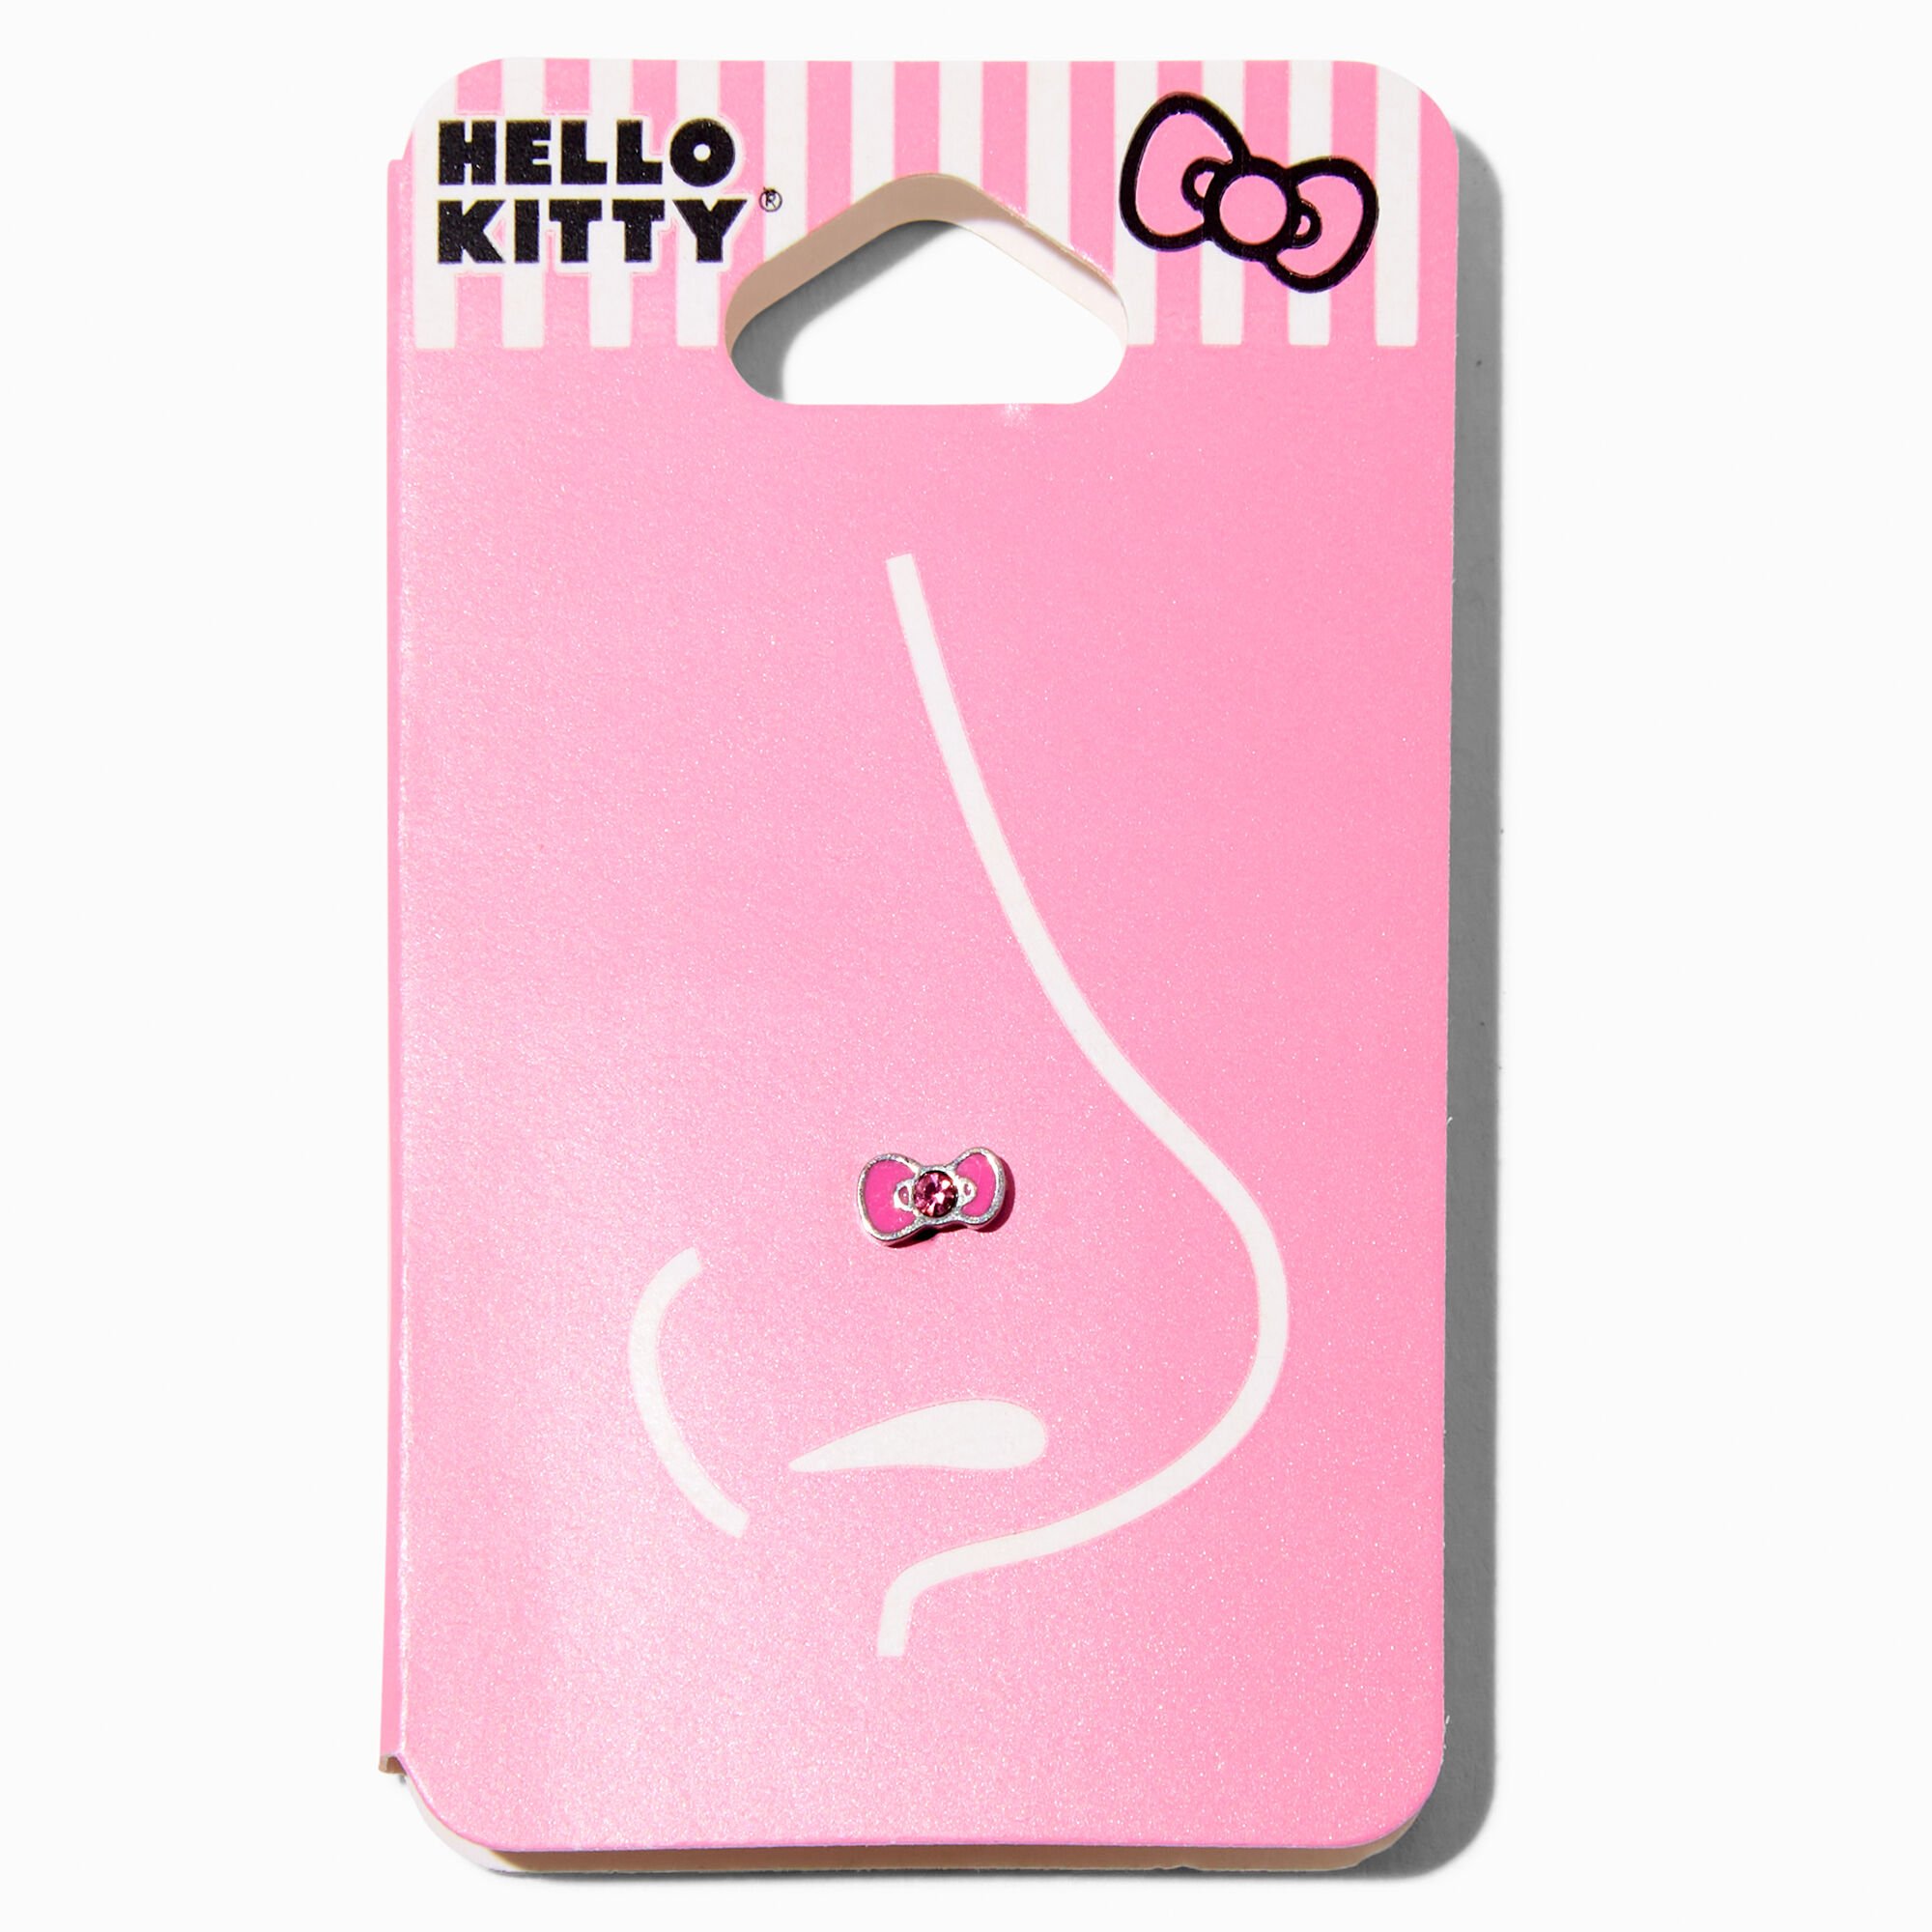 View Claires Hello Kitty Enamel Bow 20G Nose Stud Pink information